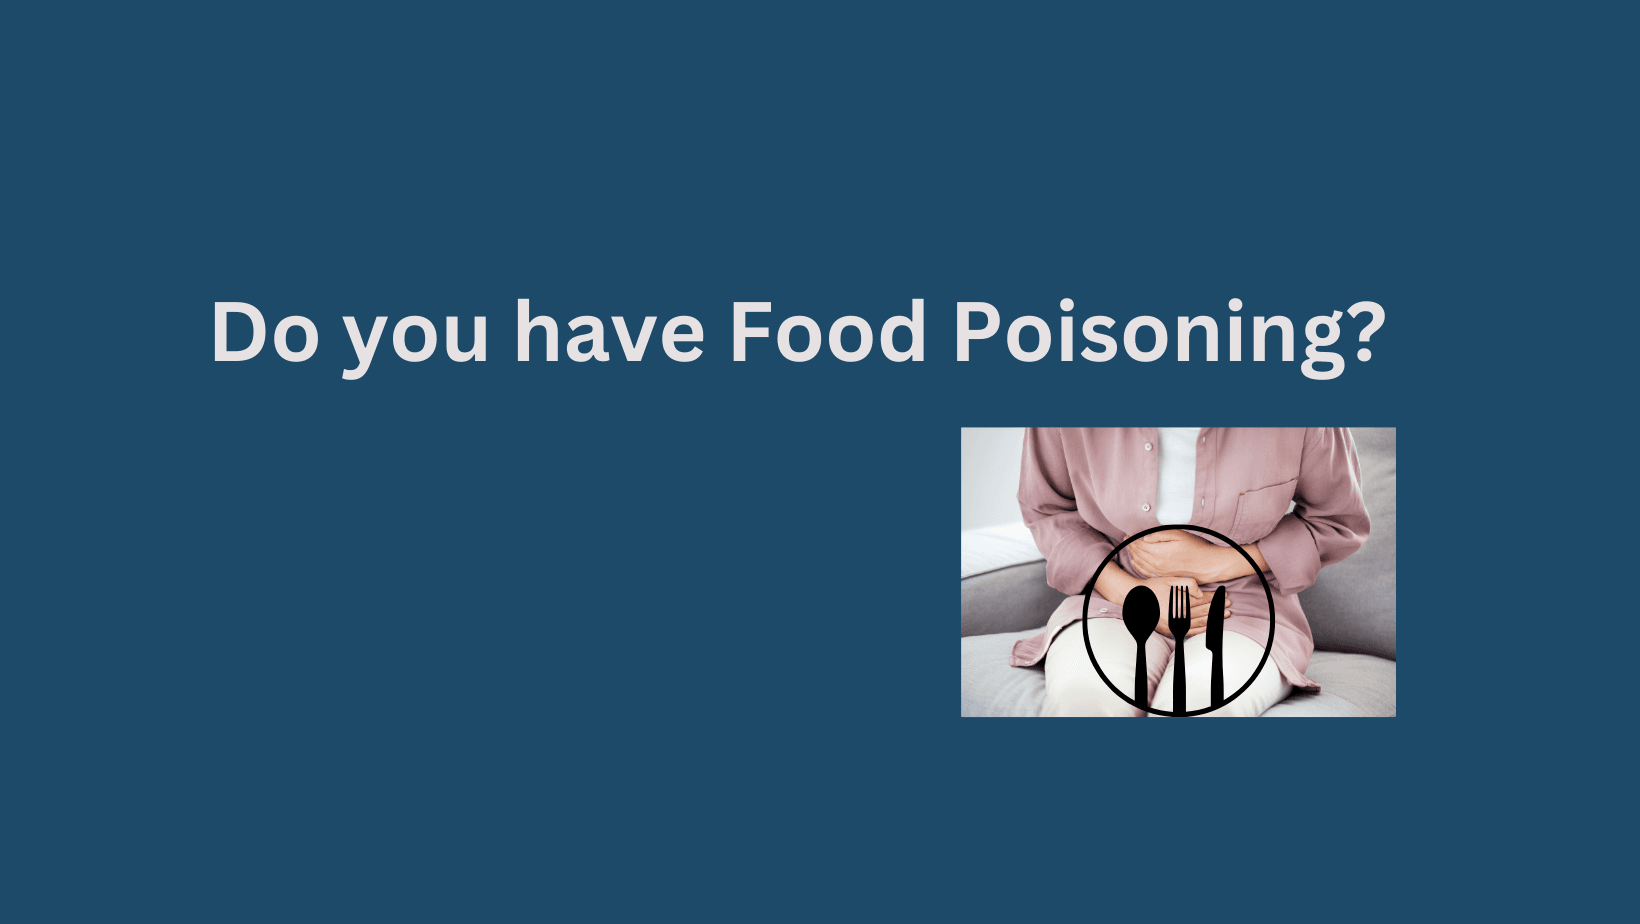 Do you have food poisoning?